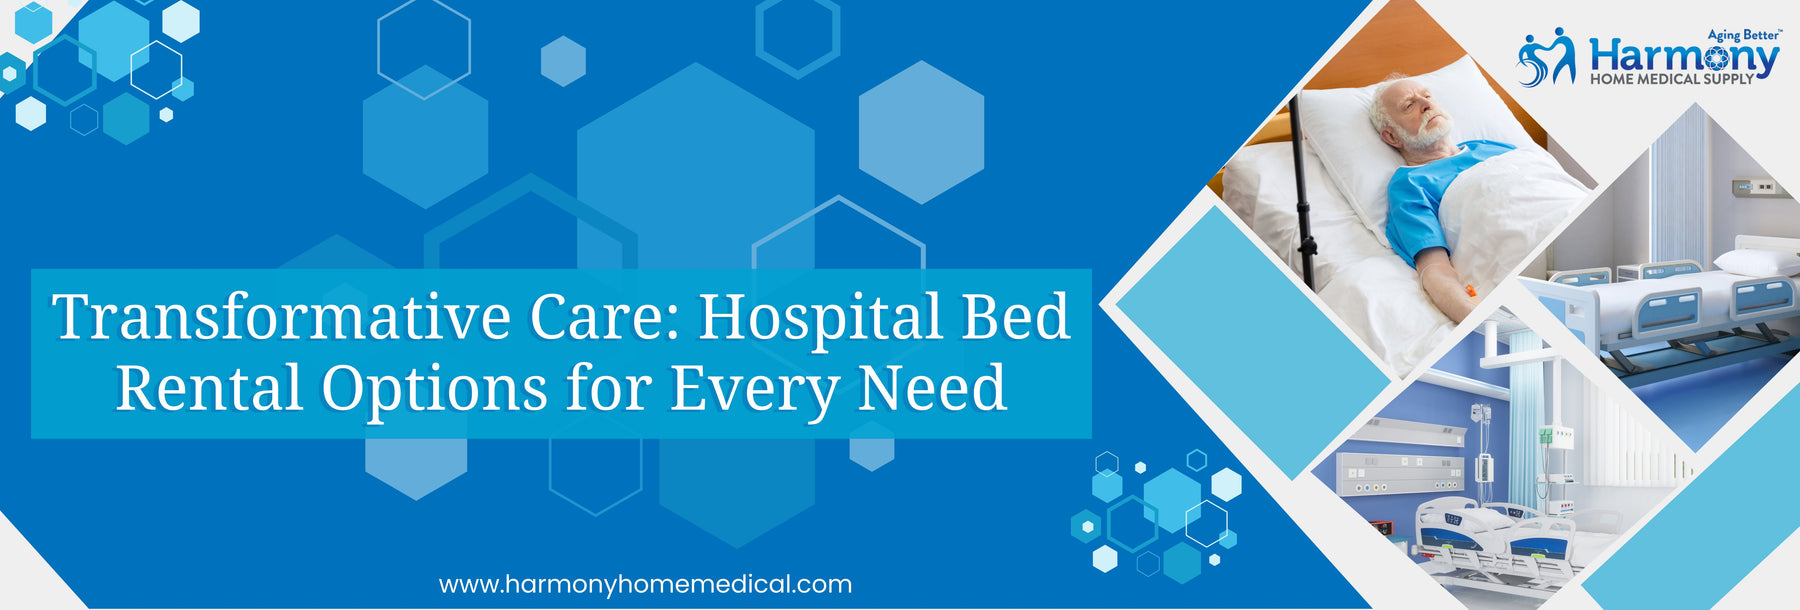 How Much Does It Cost To Rent A Hospital Bed? - Harmony Home Medical Supply